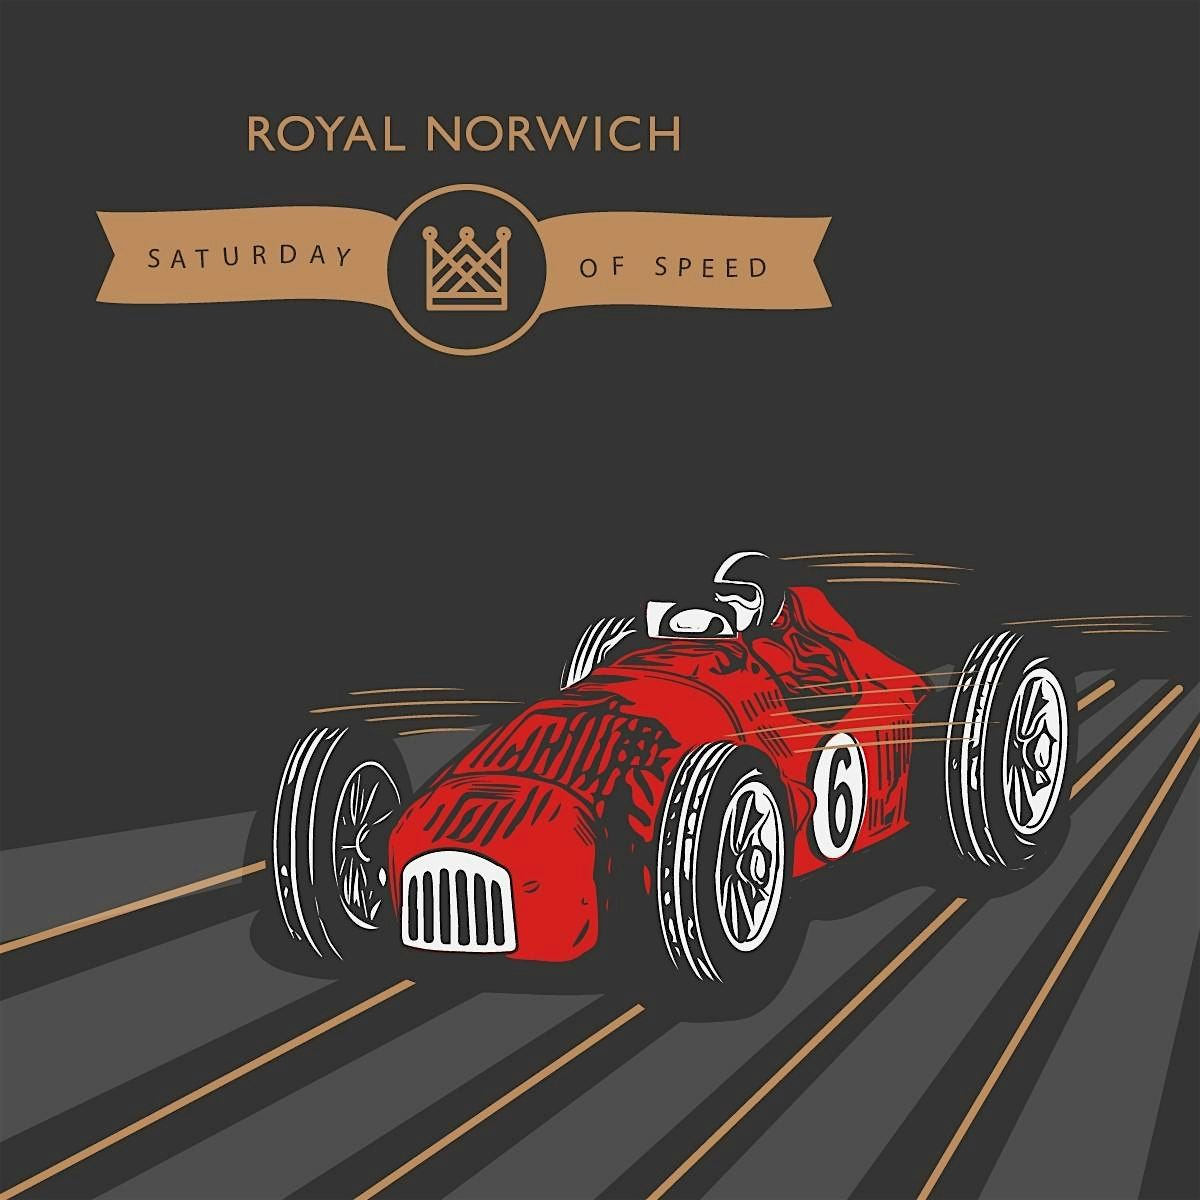 Saturday of Speed at Royal Norwich | Cars Cars Cars!